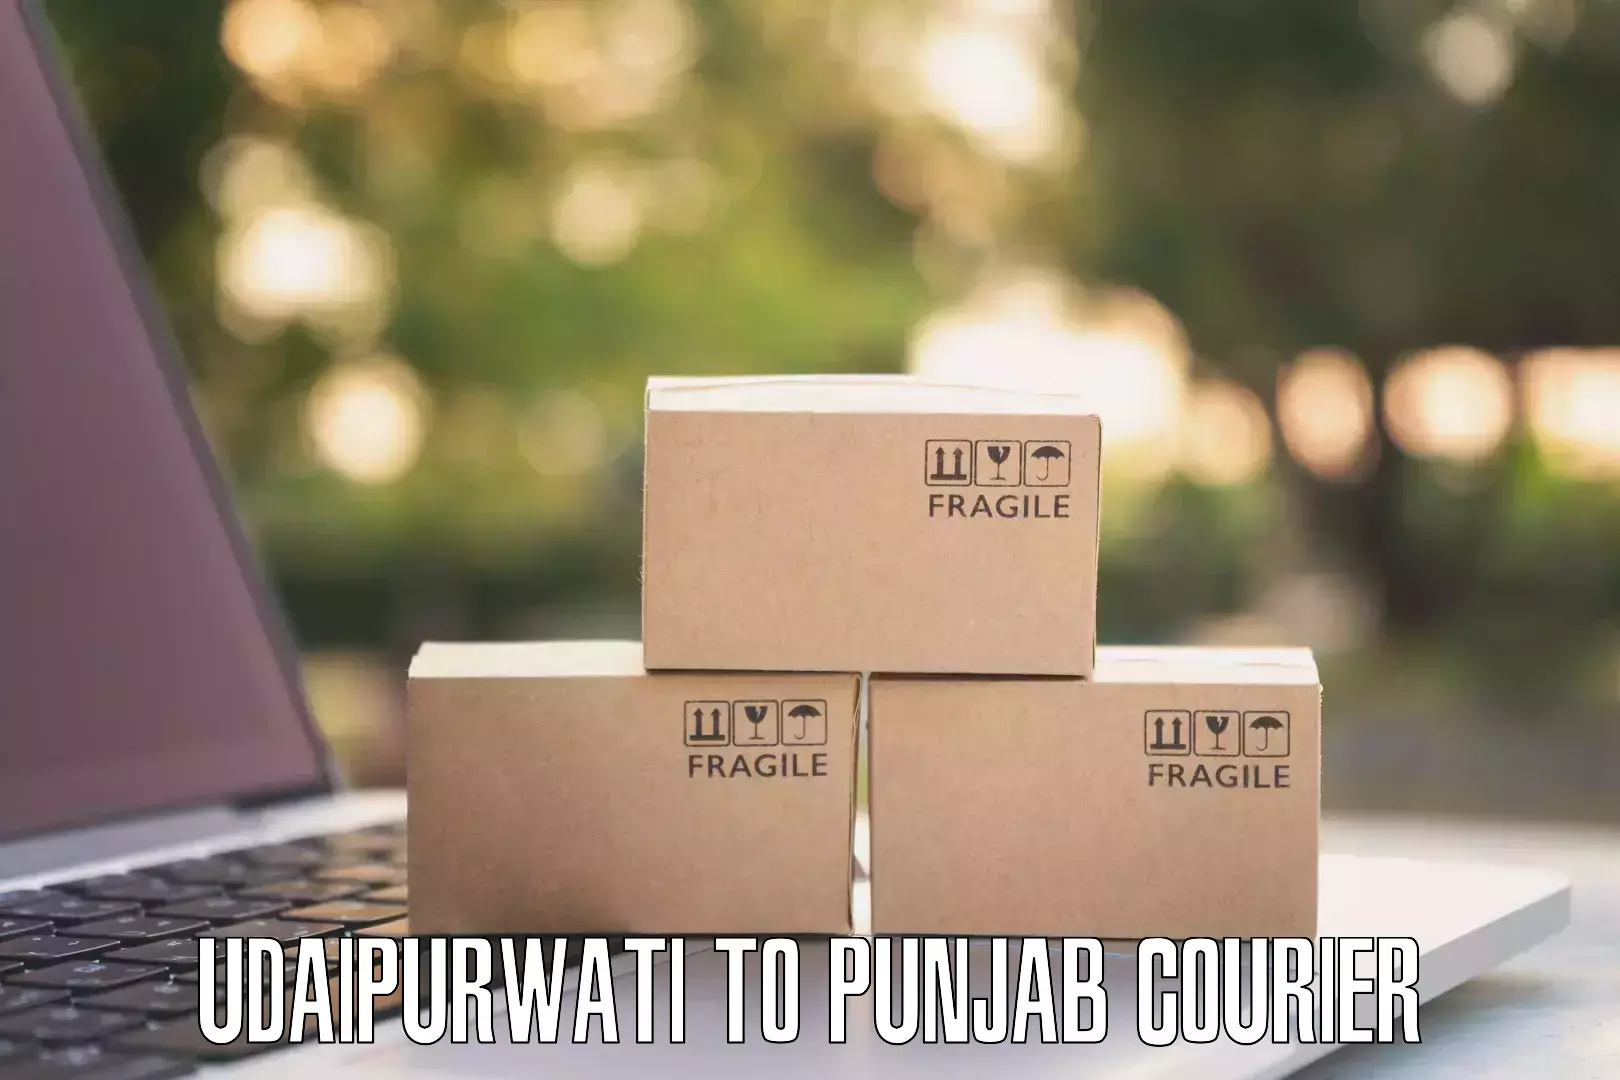 Customized delivery options Udaipurwati to Mohali